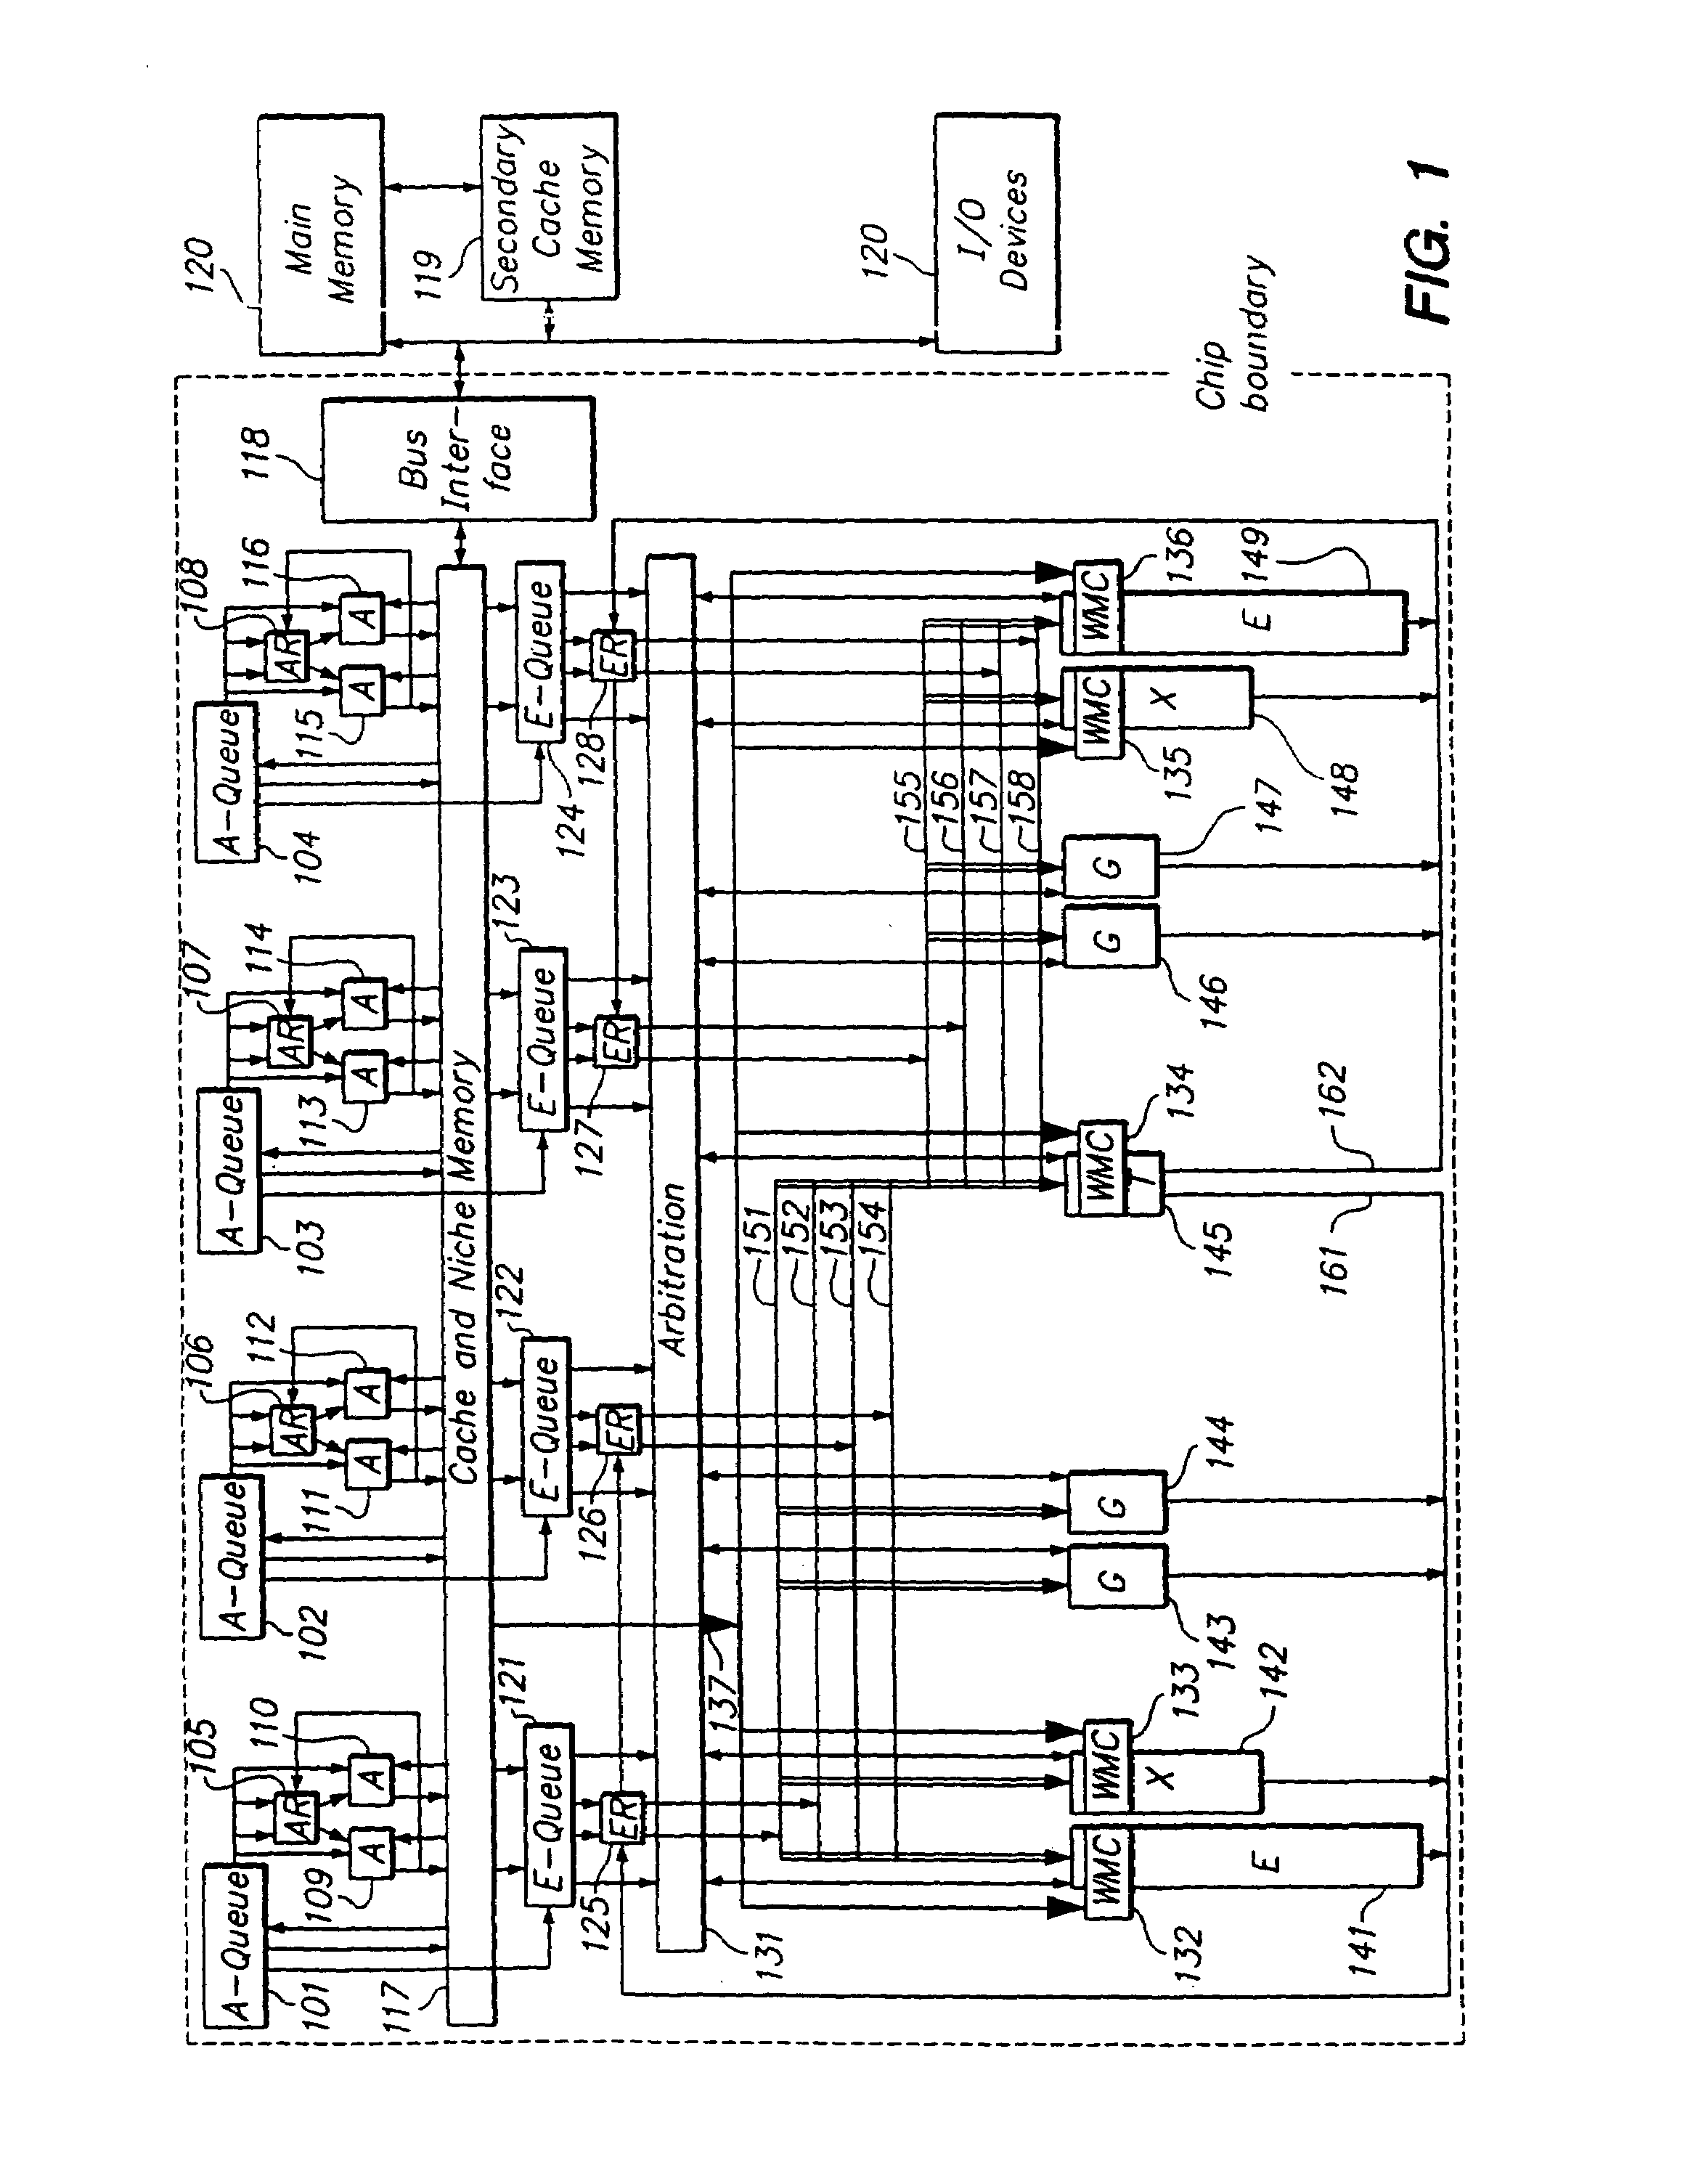 Programmable processor with group floating-point operations